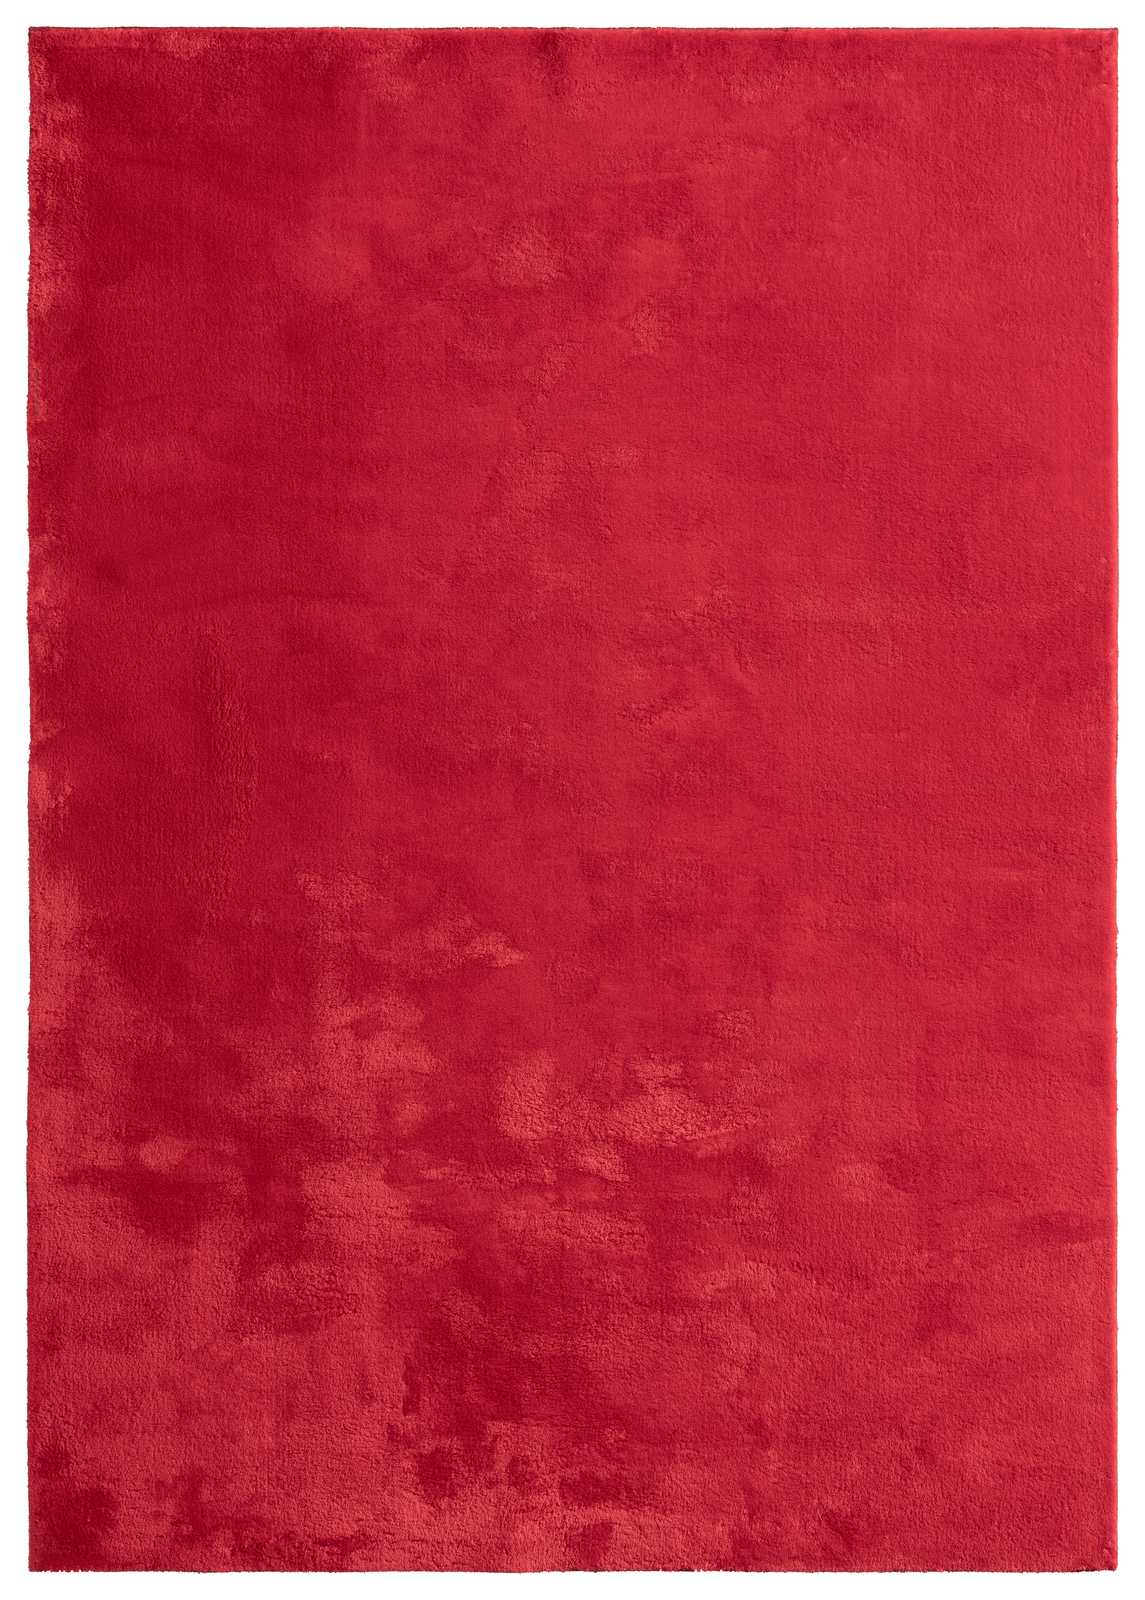             Extra soft high pile carpet in red - 290 x 200 cm
        